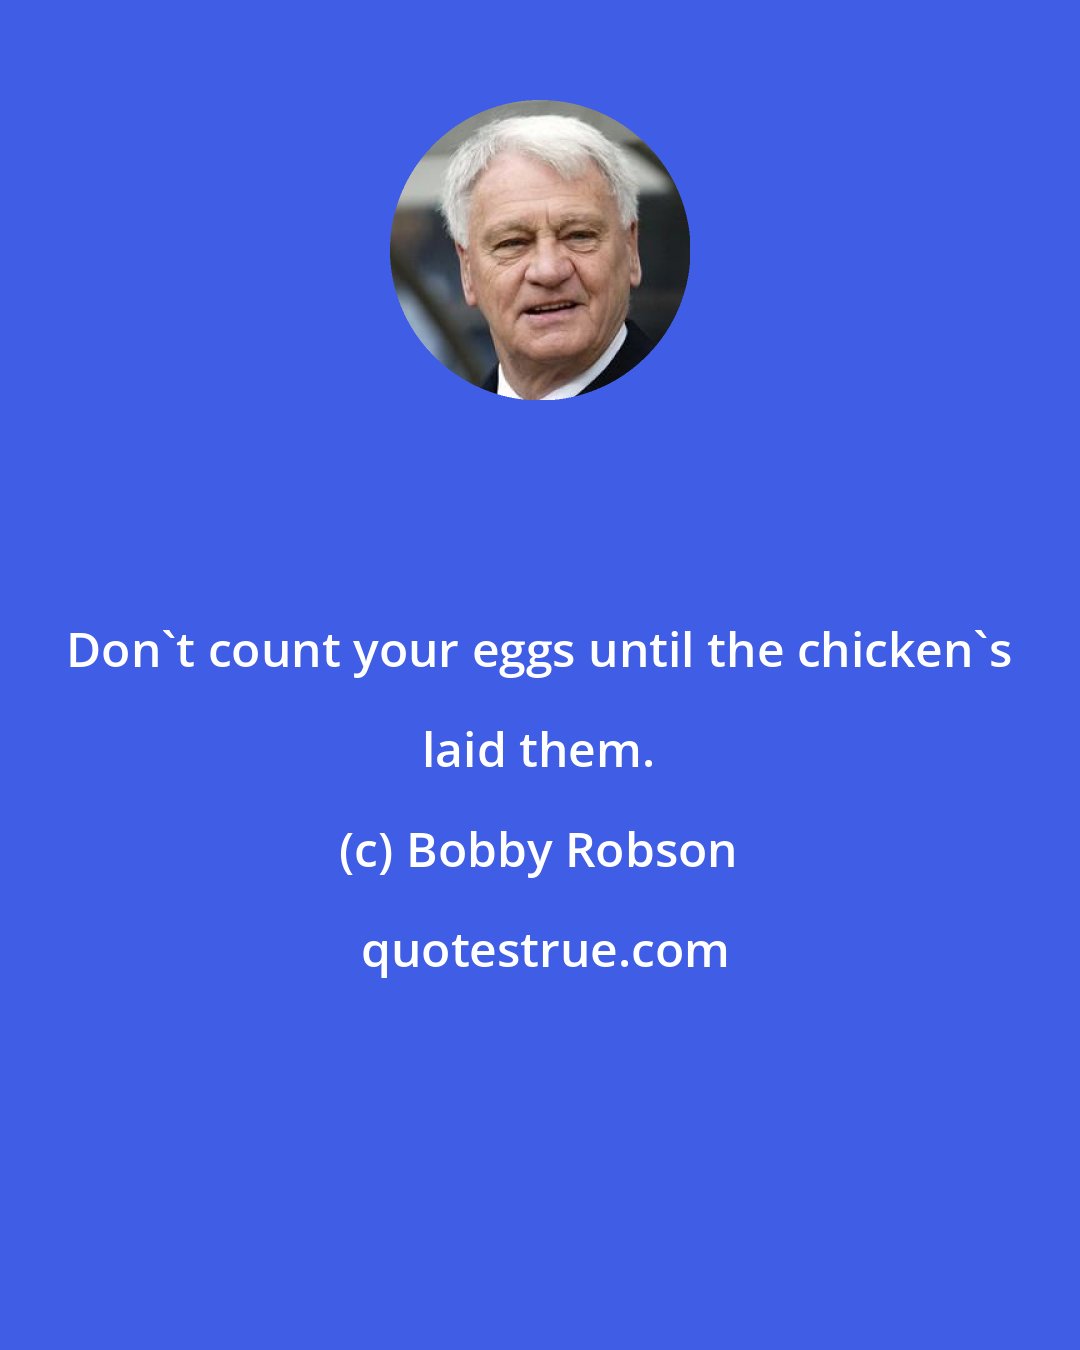 Bobby Robson: Don't count your eggs until the chicken's laid them.